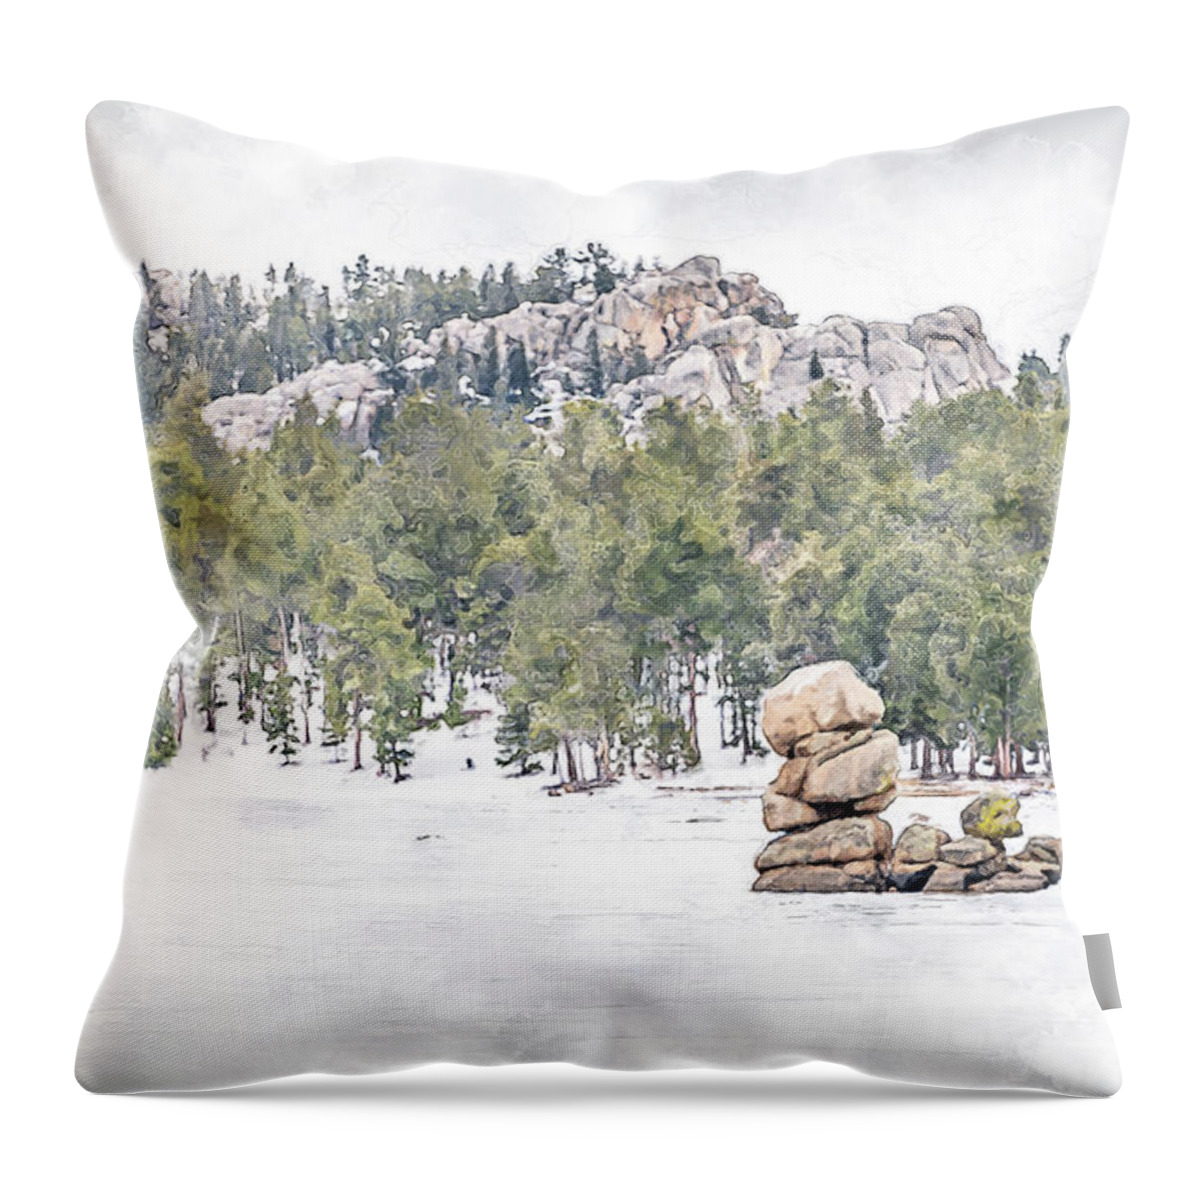 Lake Throw Pillow featuring the photograph Dowdy Lake by Jennifer Grossnickle